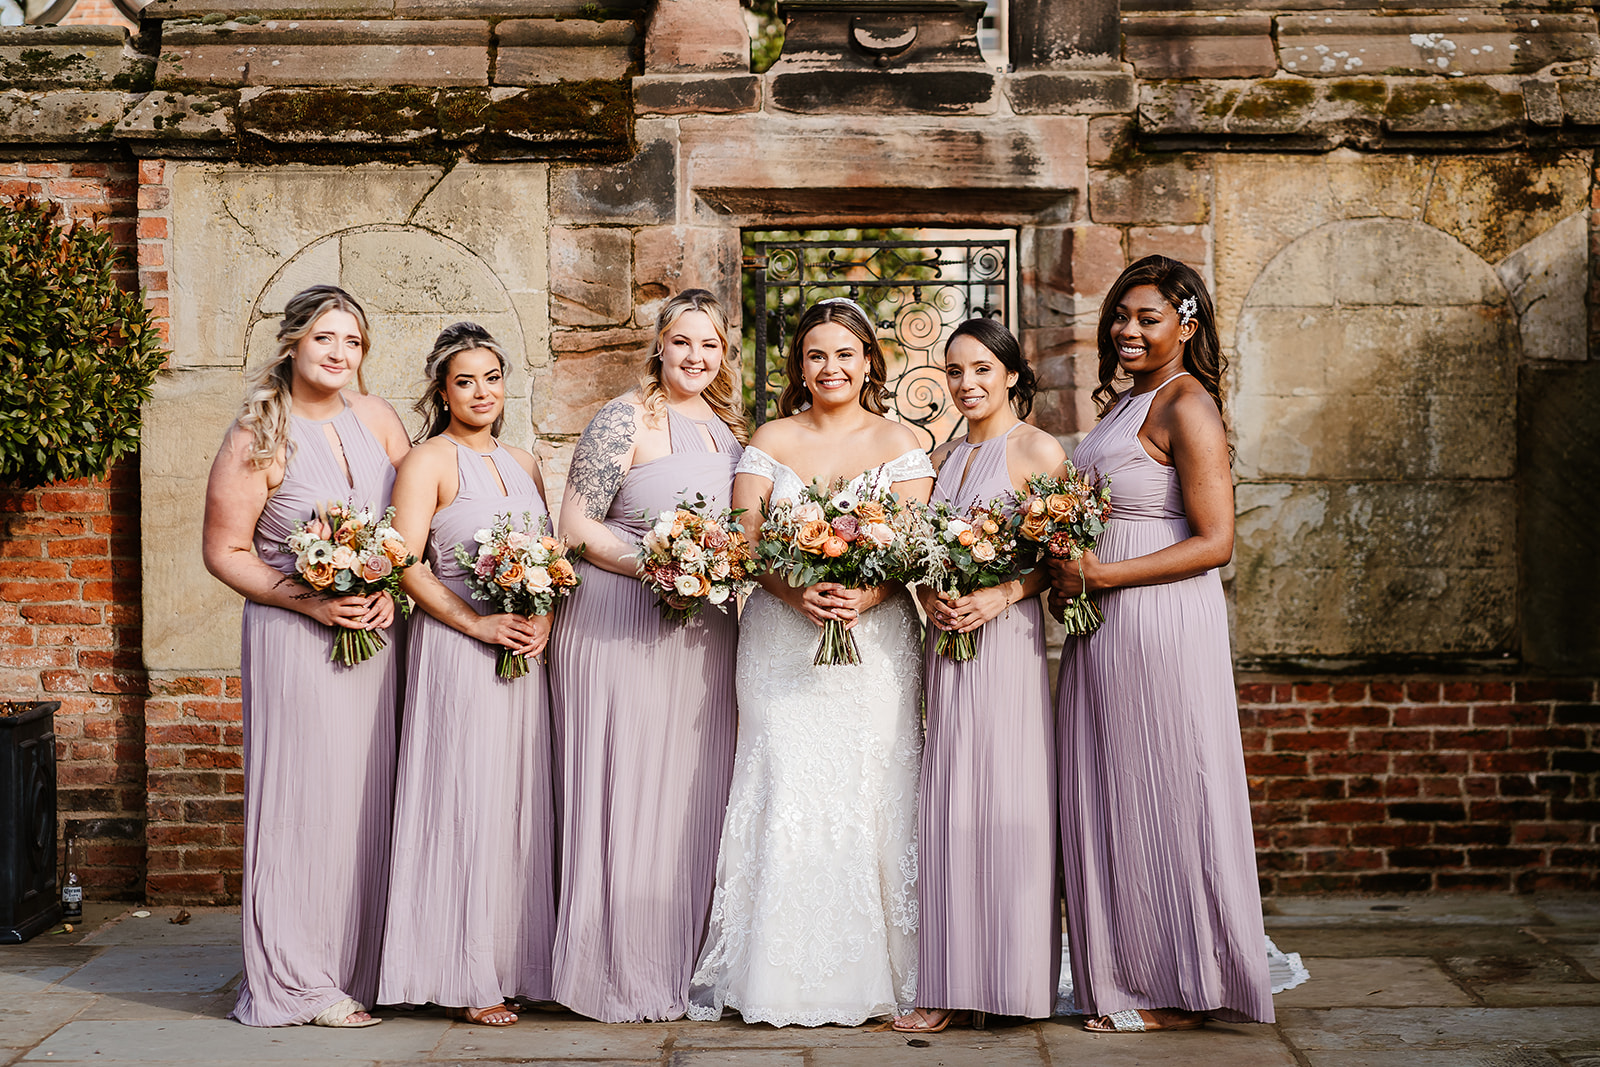 Bride and bridesmaids pose in front of ornate gate